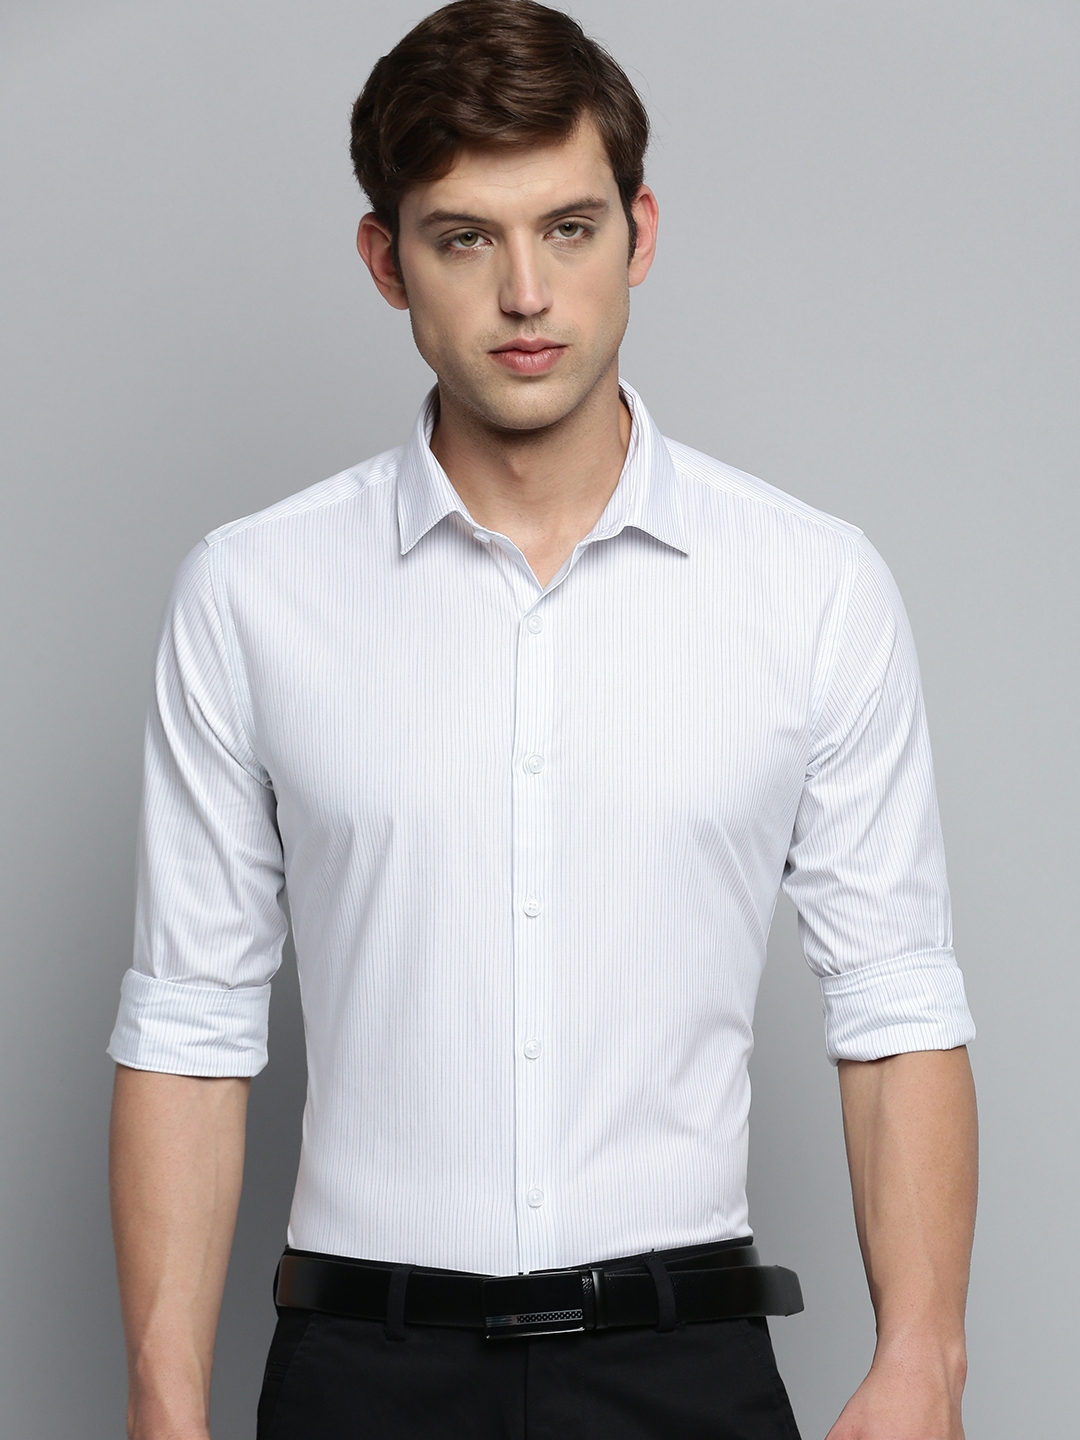 Showoff | SHOWOFF Men's Spread Collar Striped White Classic Shirt 1